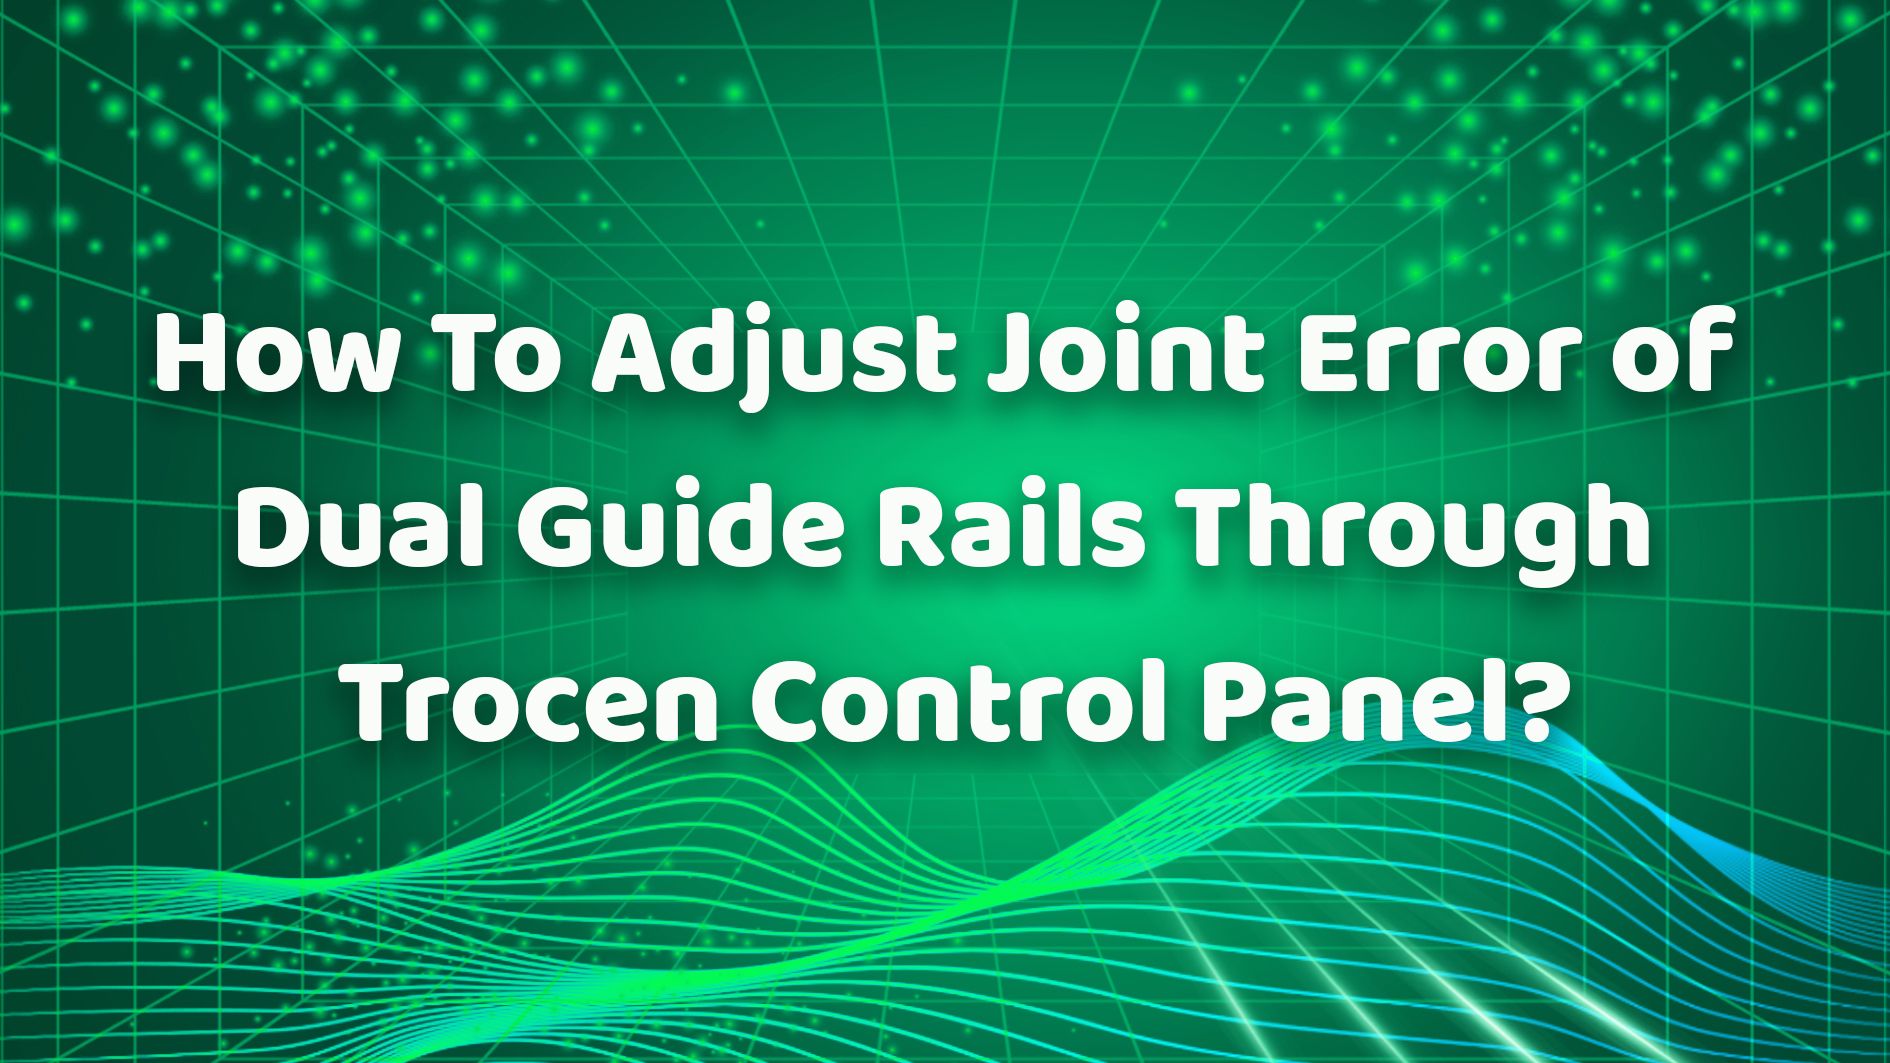 How To Adjust Joint Error of Dual Guide Rails Through Trocen Control Panel？